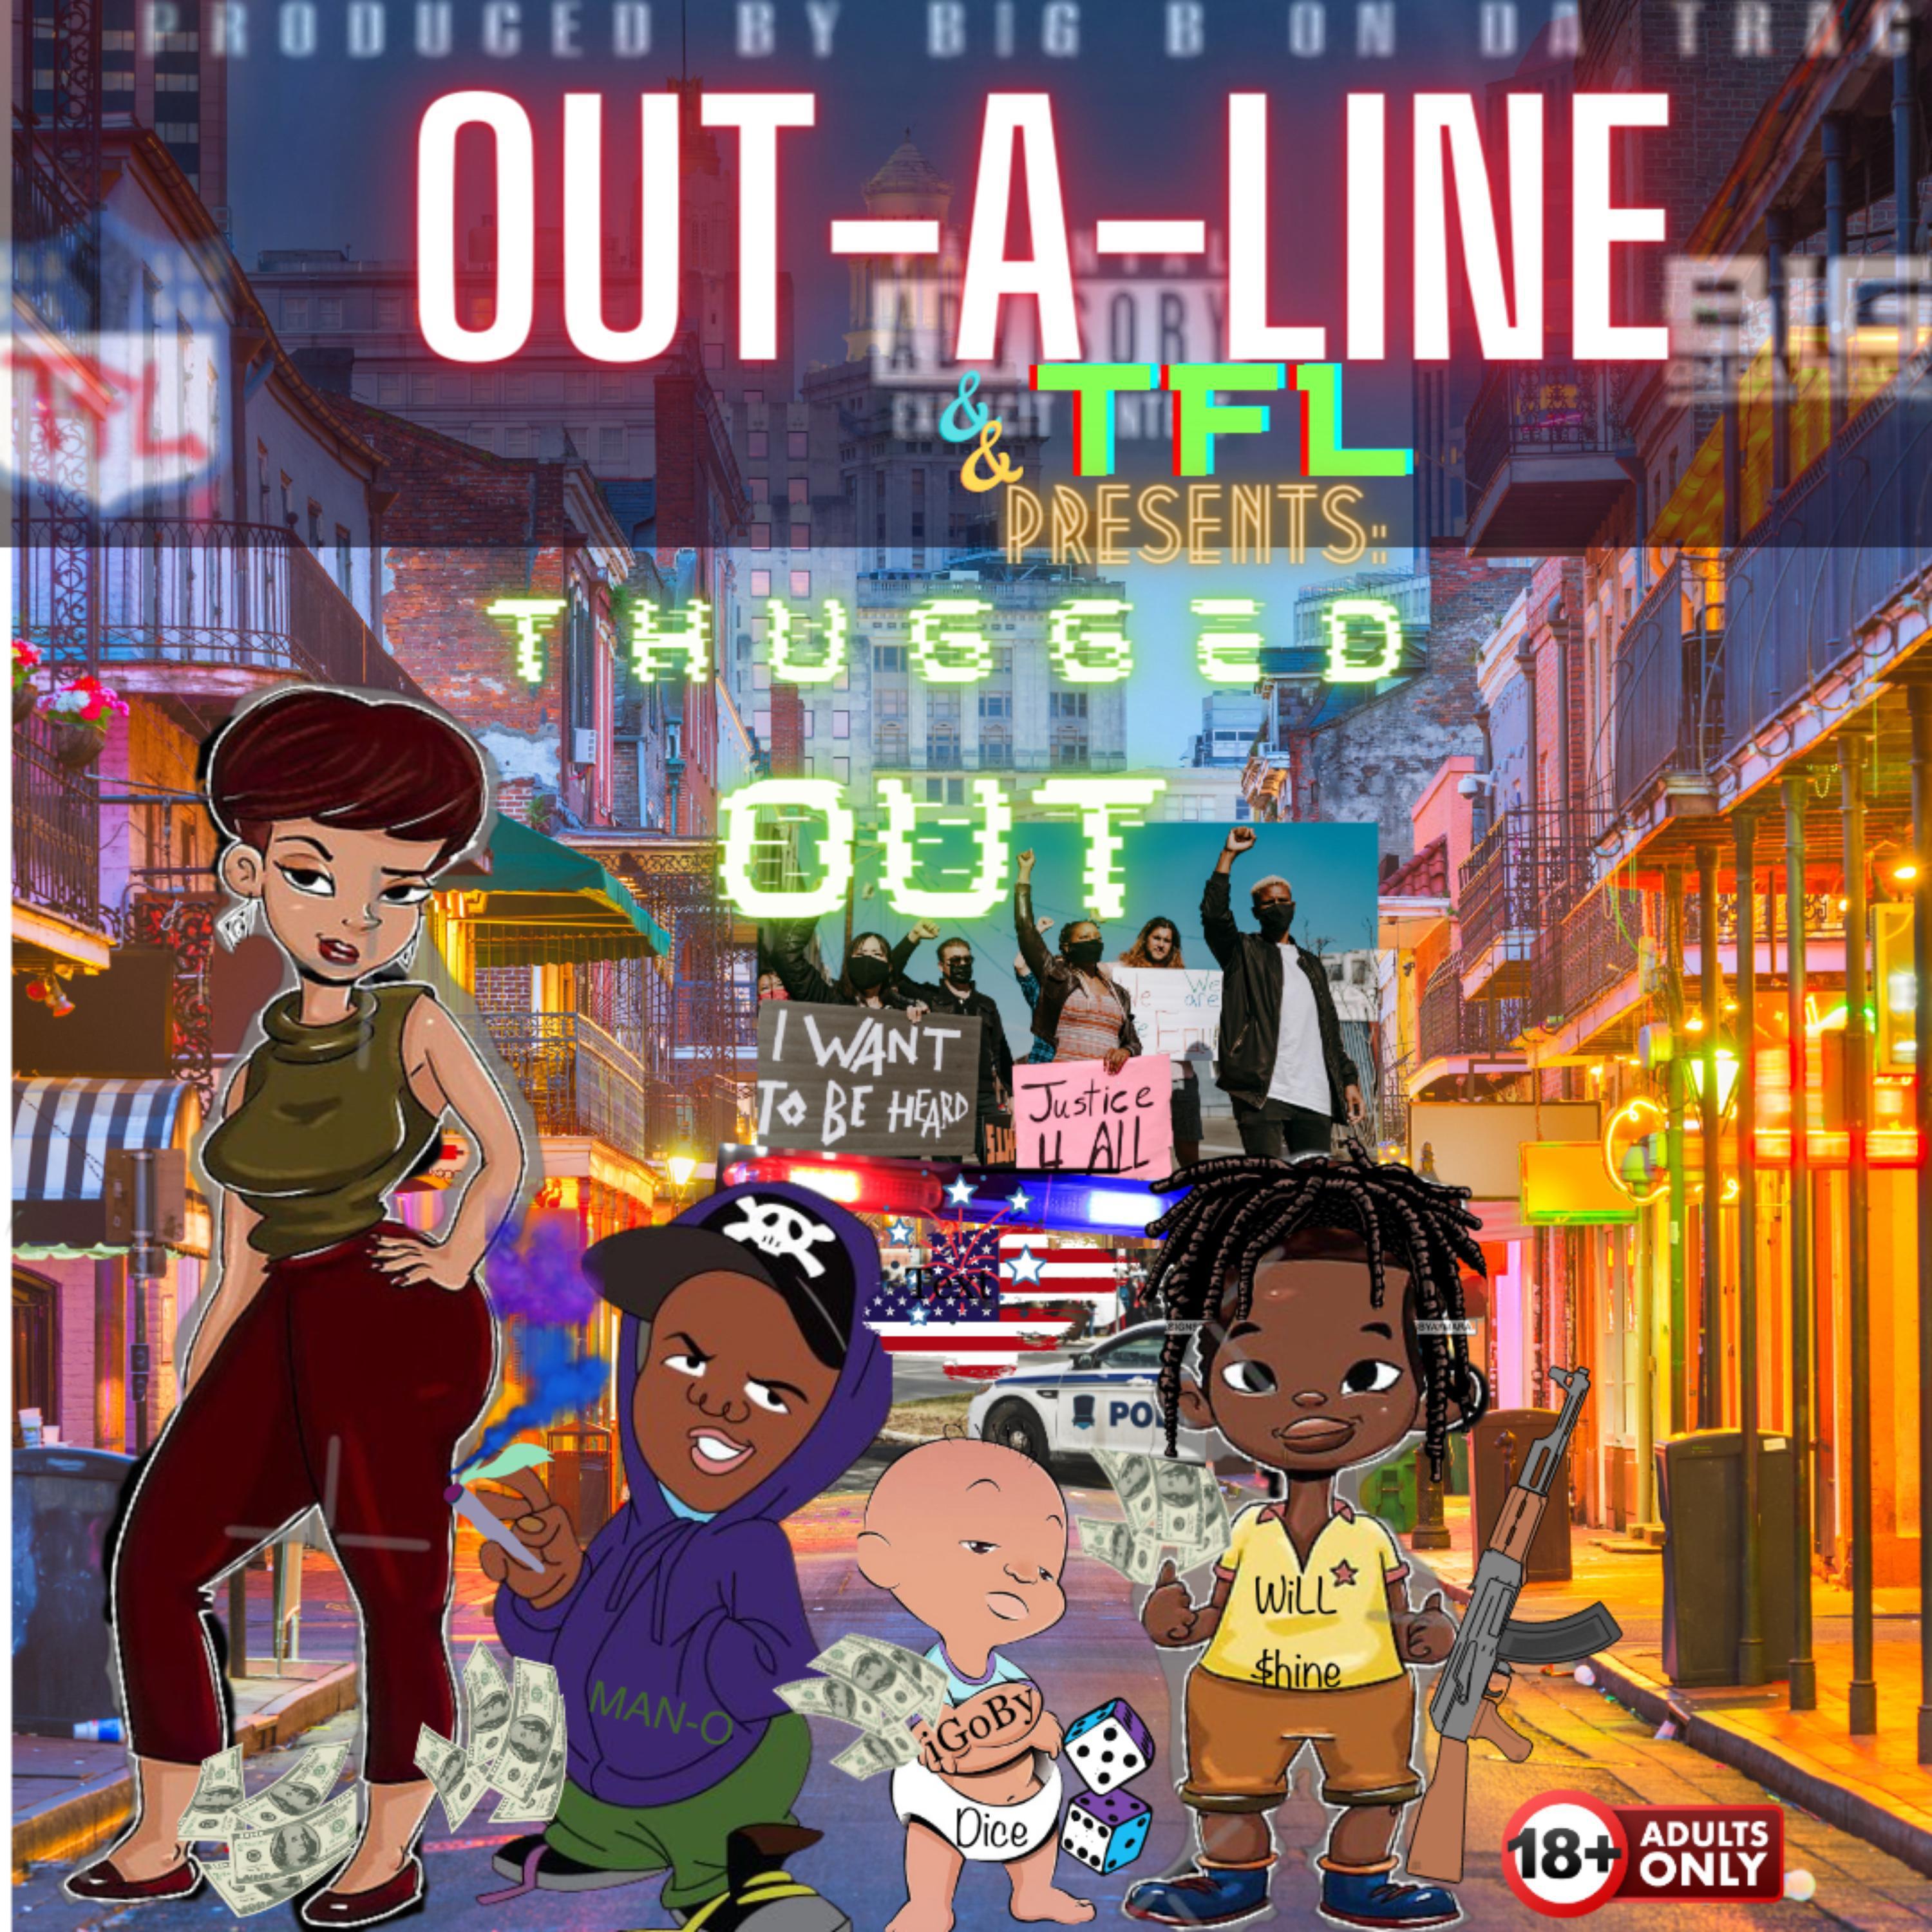 Will $hine - THUGGED OUT